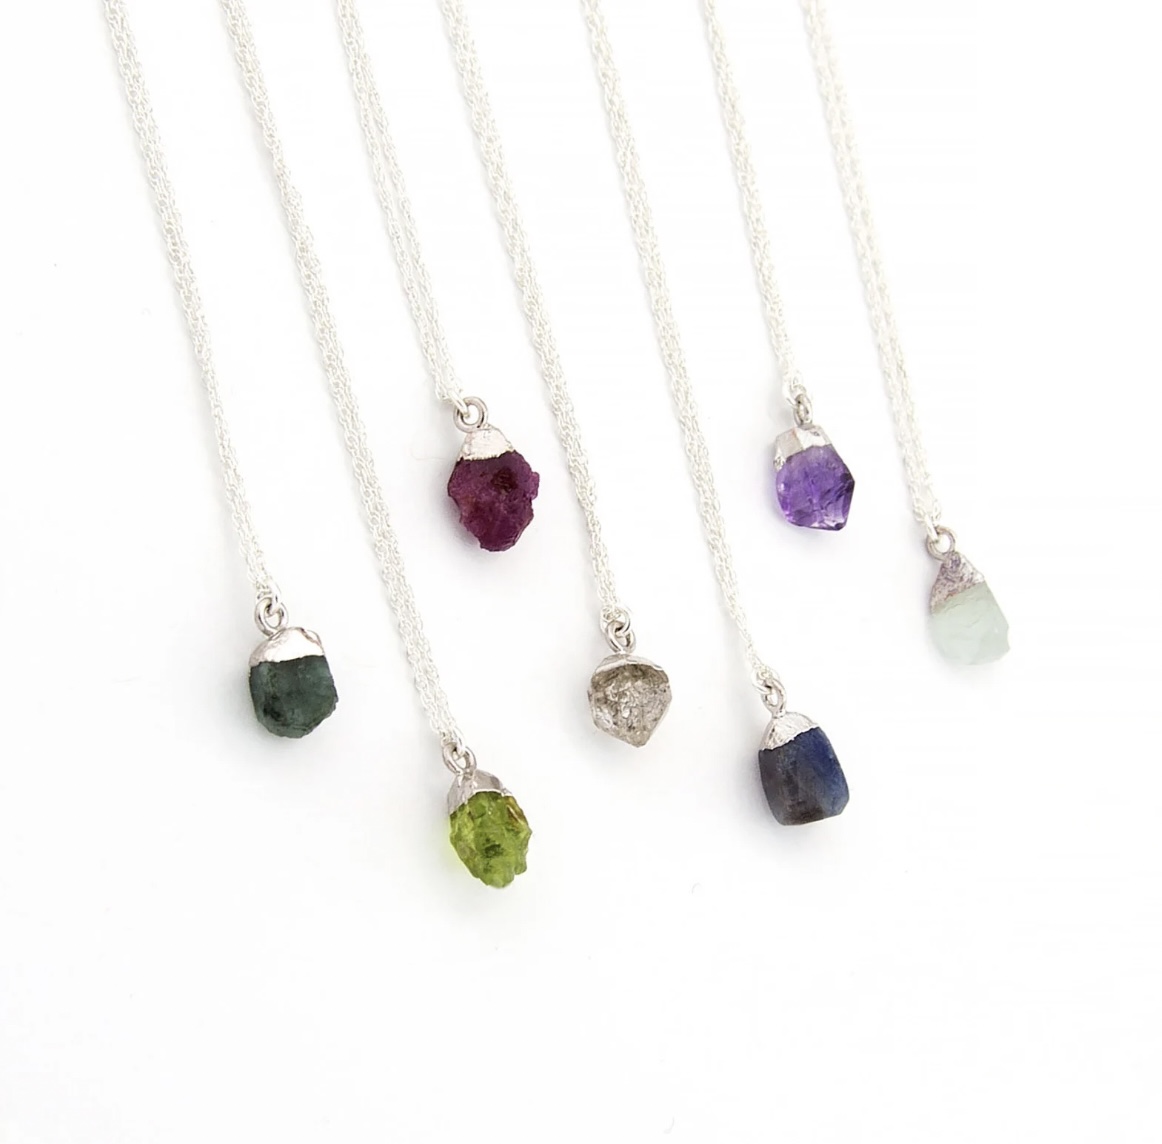 10 amazing aries birthstone gifts | find the perfect gift featuring aries birthstones.